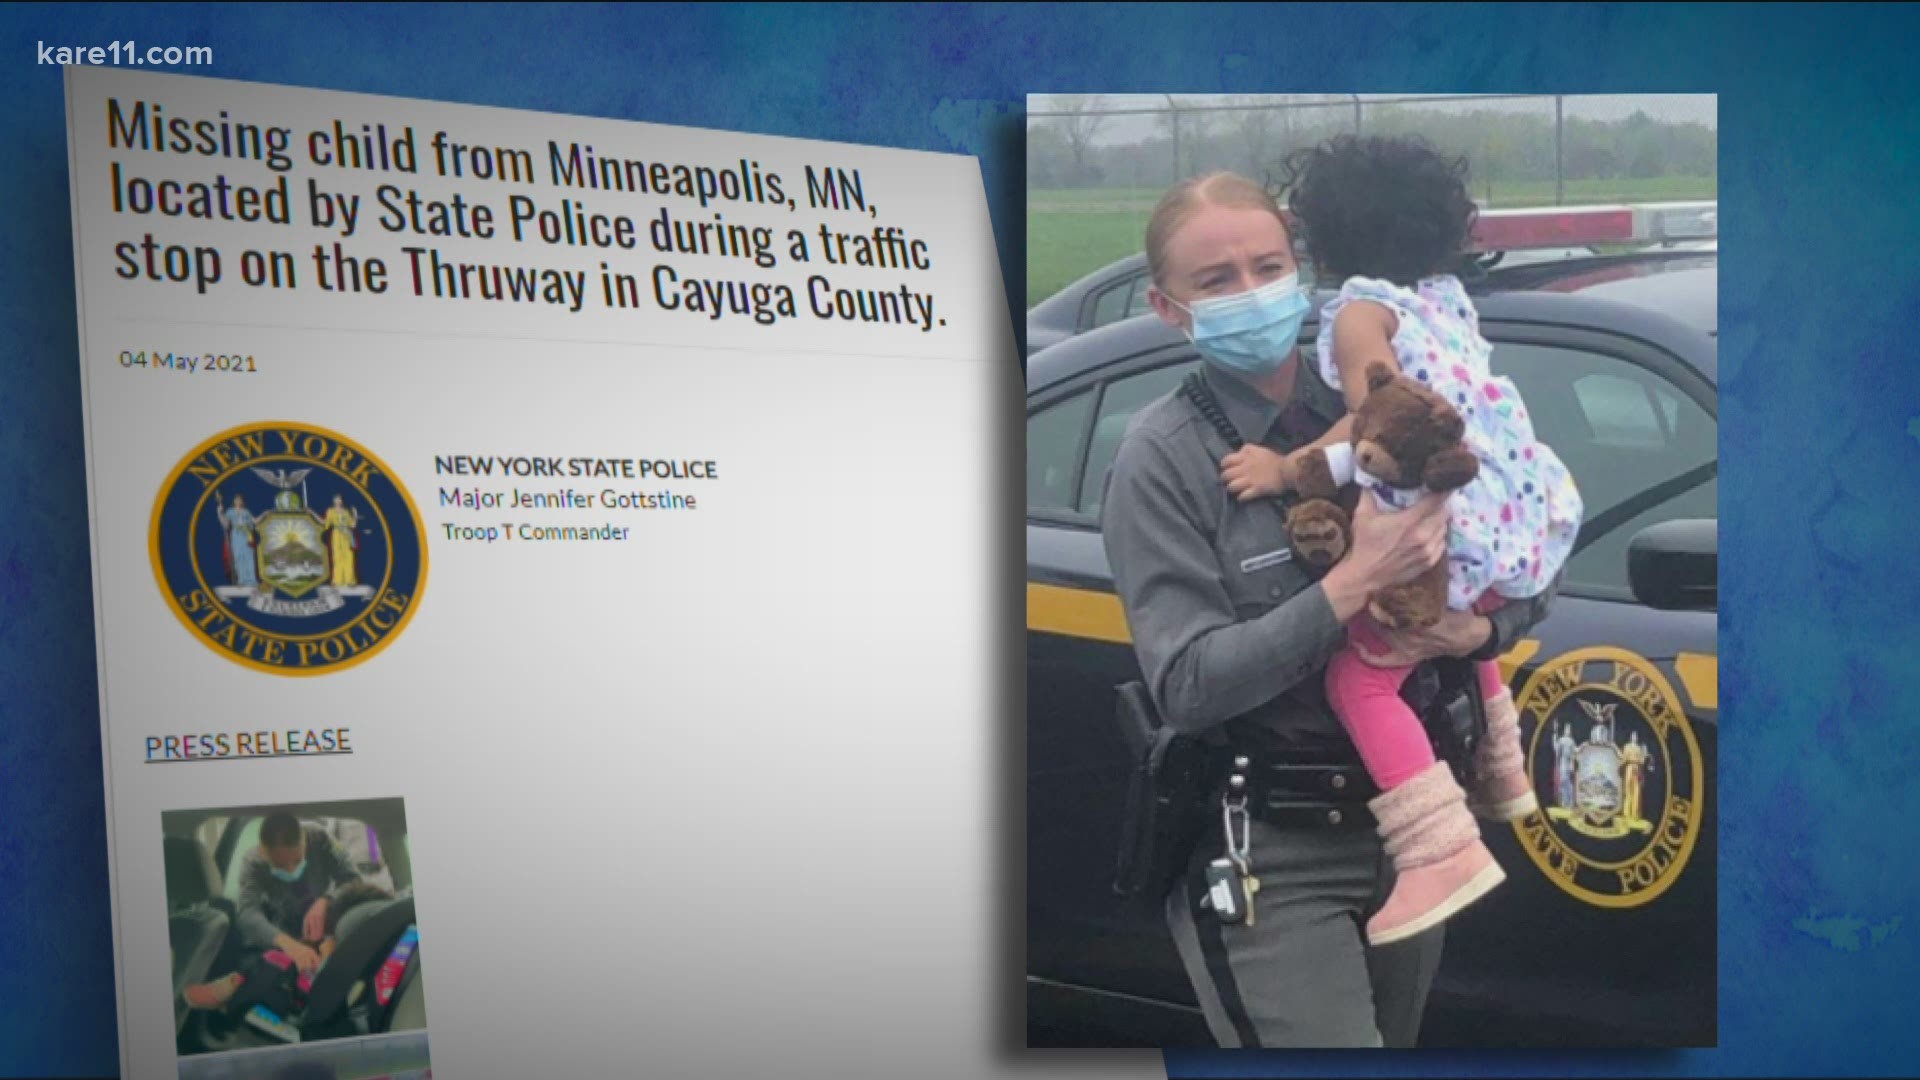 Investigators said 2-year-old Nasteha Mohamed was found after a traffic stop in New York state, carried out by an officer who had seen a national alert